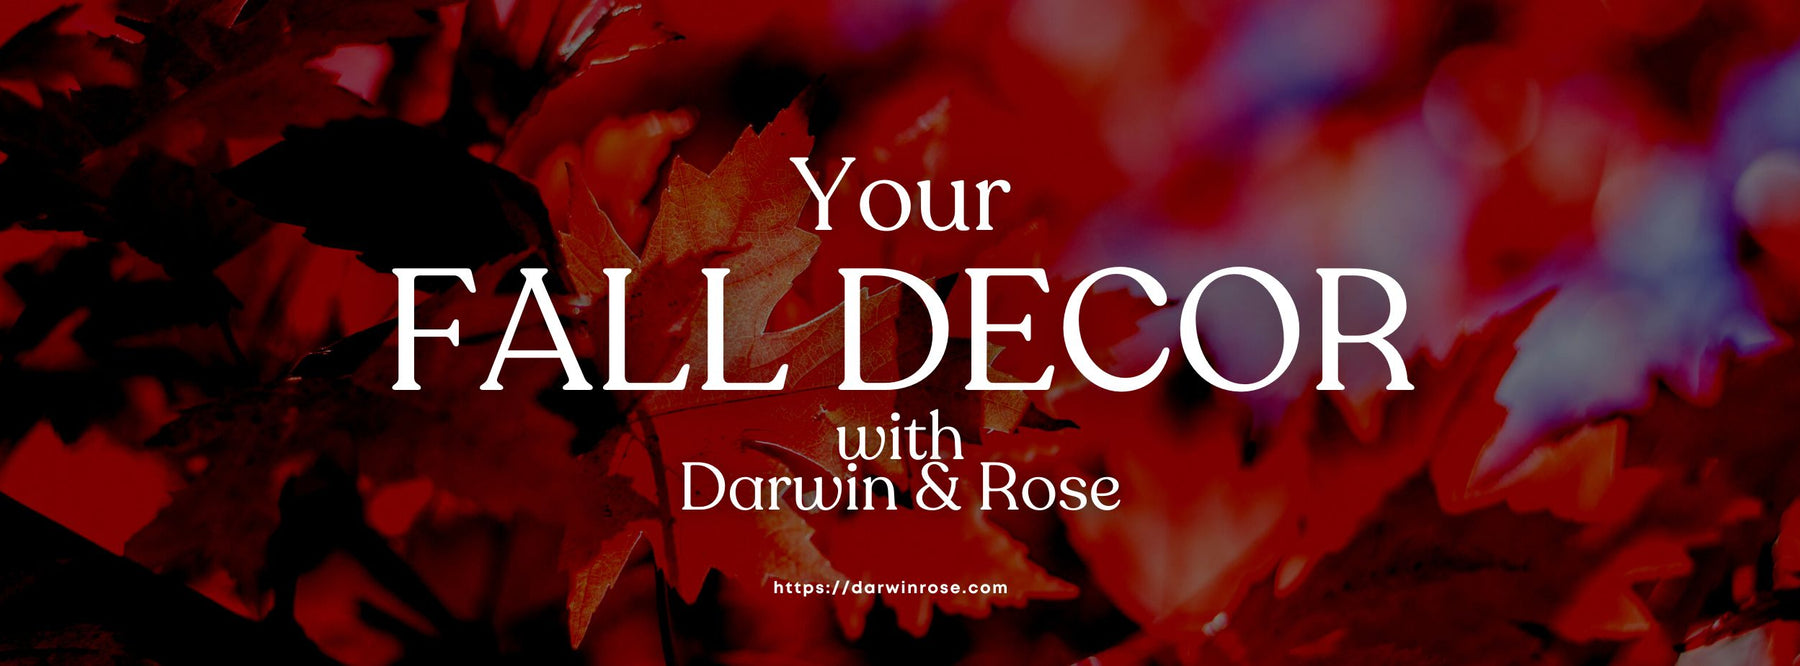 Quick, Chic, and Unique: Your Fall Decor Ideas with Darwin & Rose Home Decor!